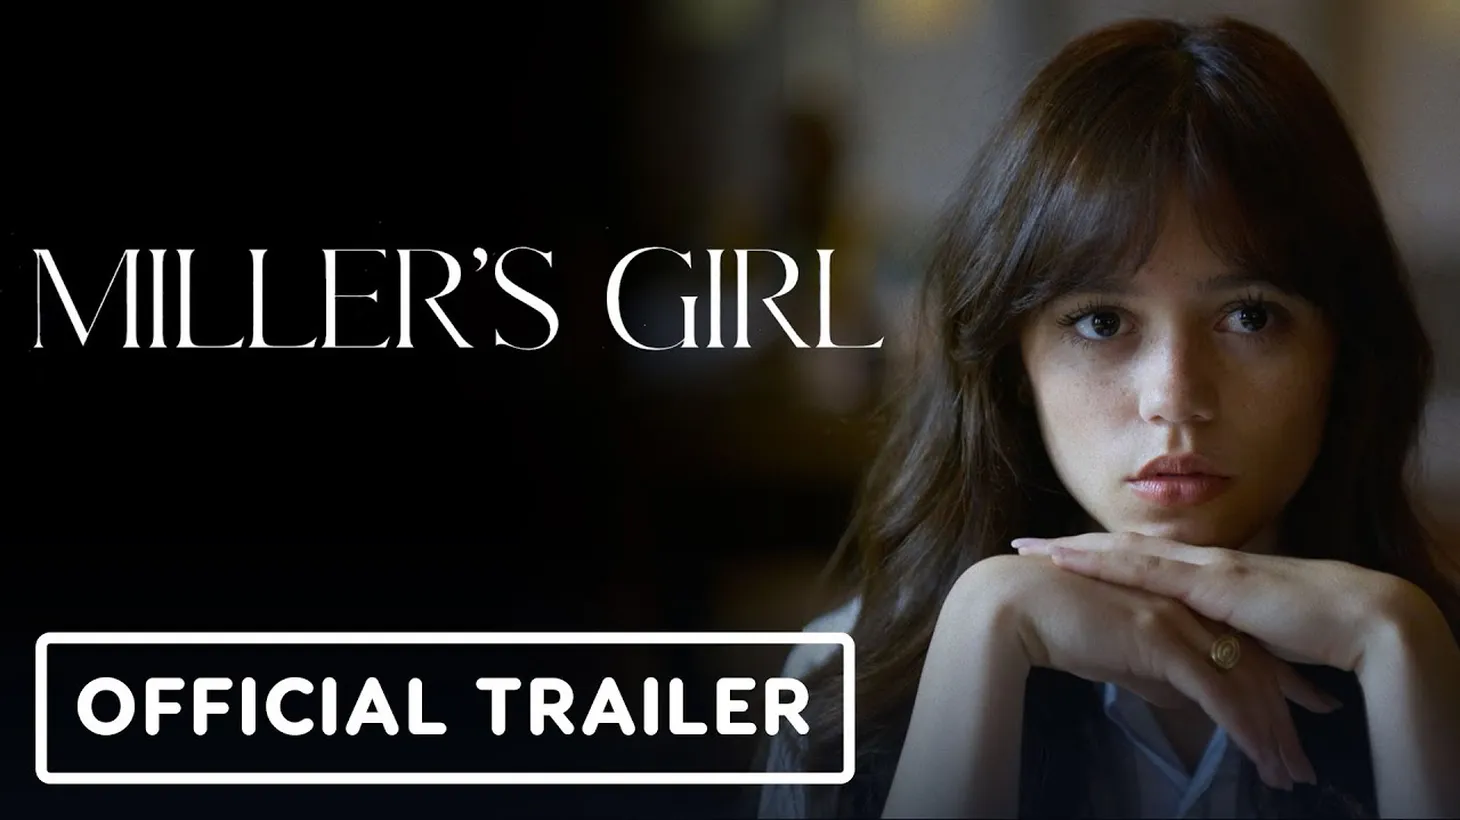 In “Miller’s Girl,” Jenna Ortega plays a gifted, Gothic, 18-year-old student who lives in a small Tennessee town with mostly absent parents.